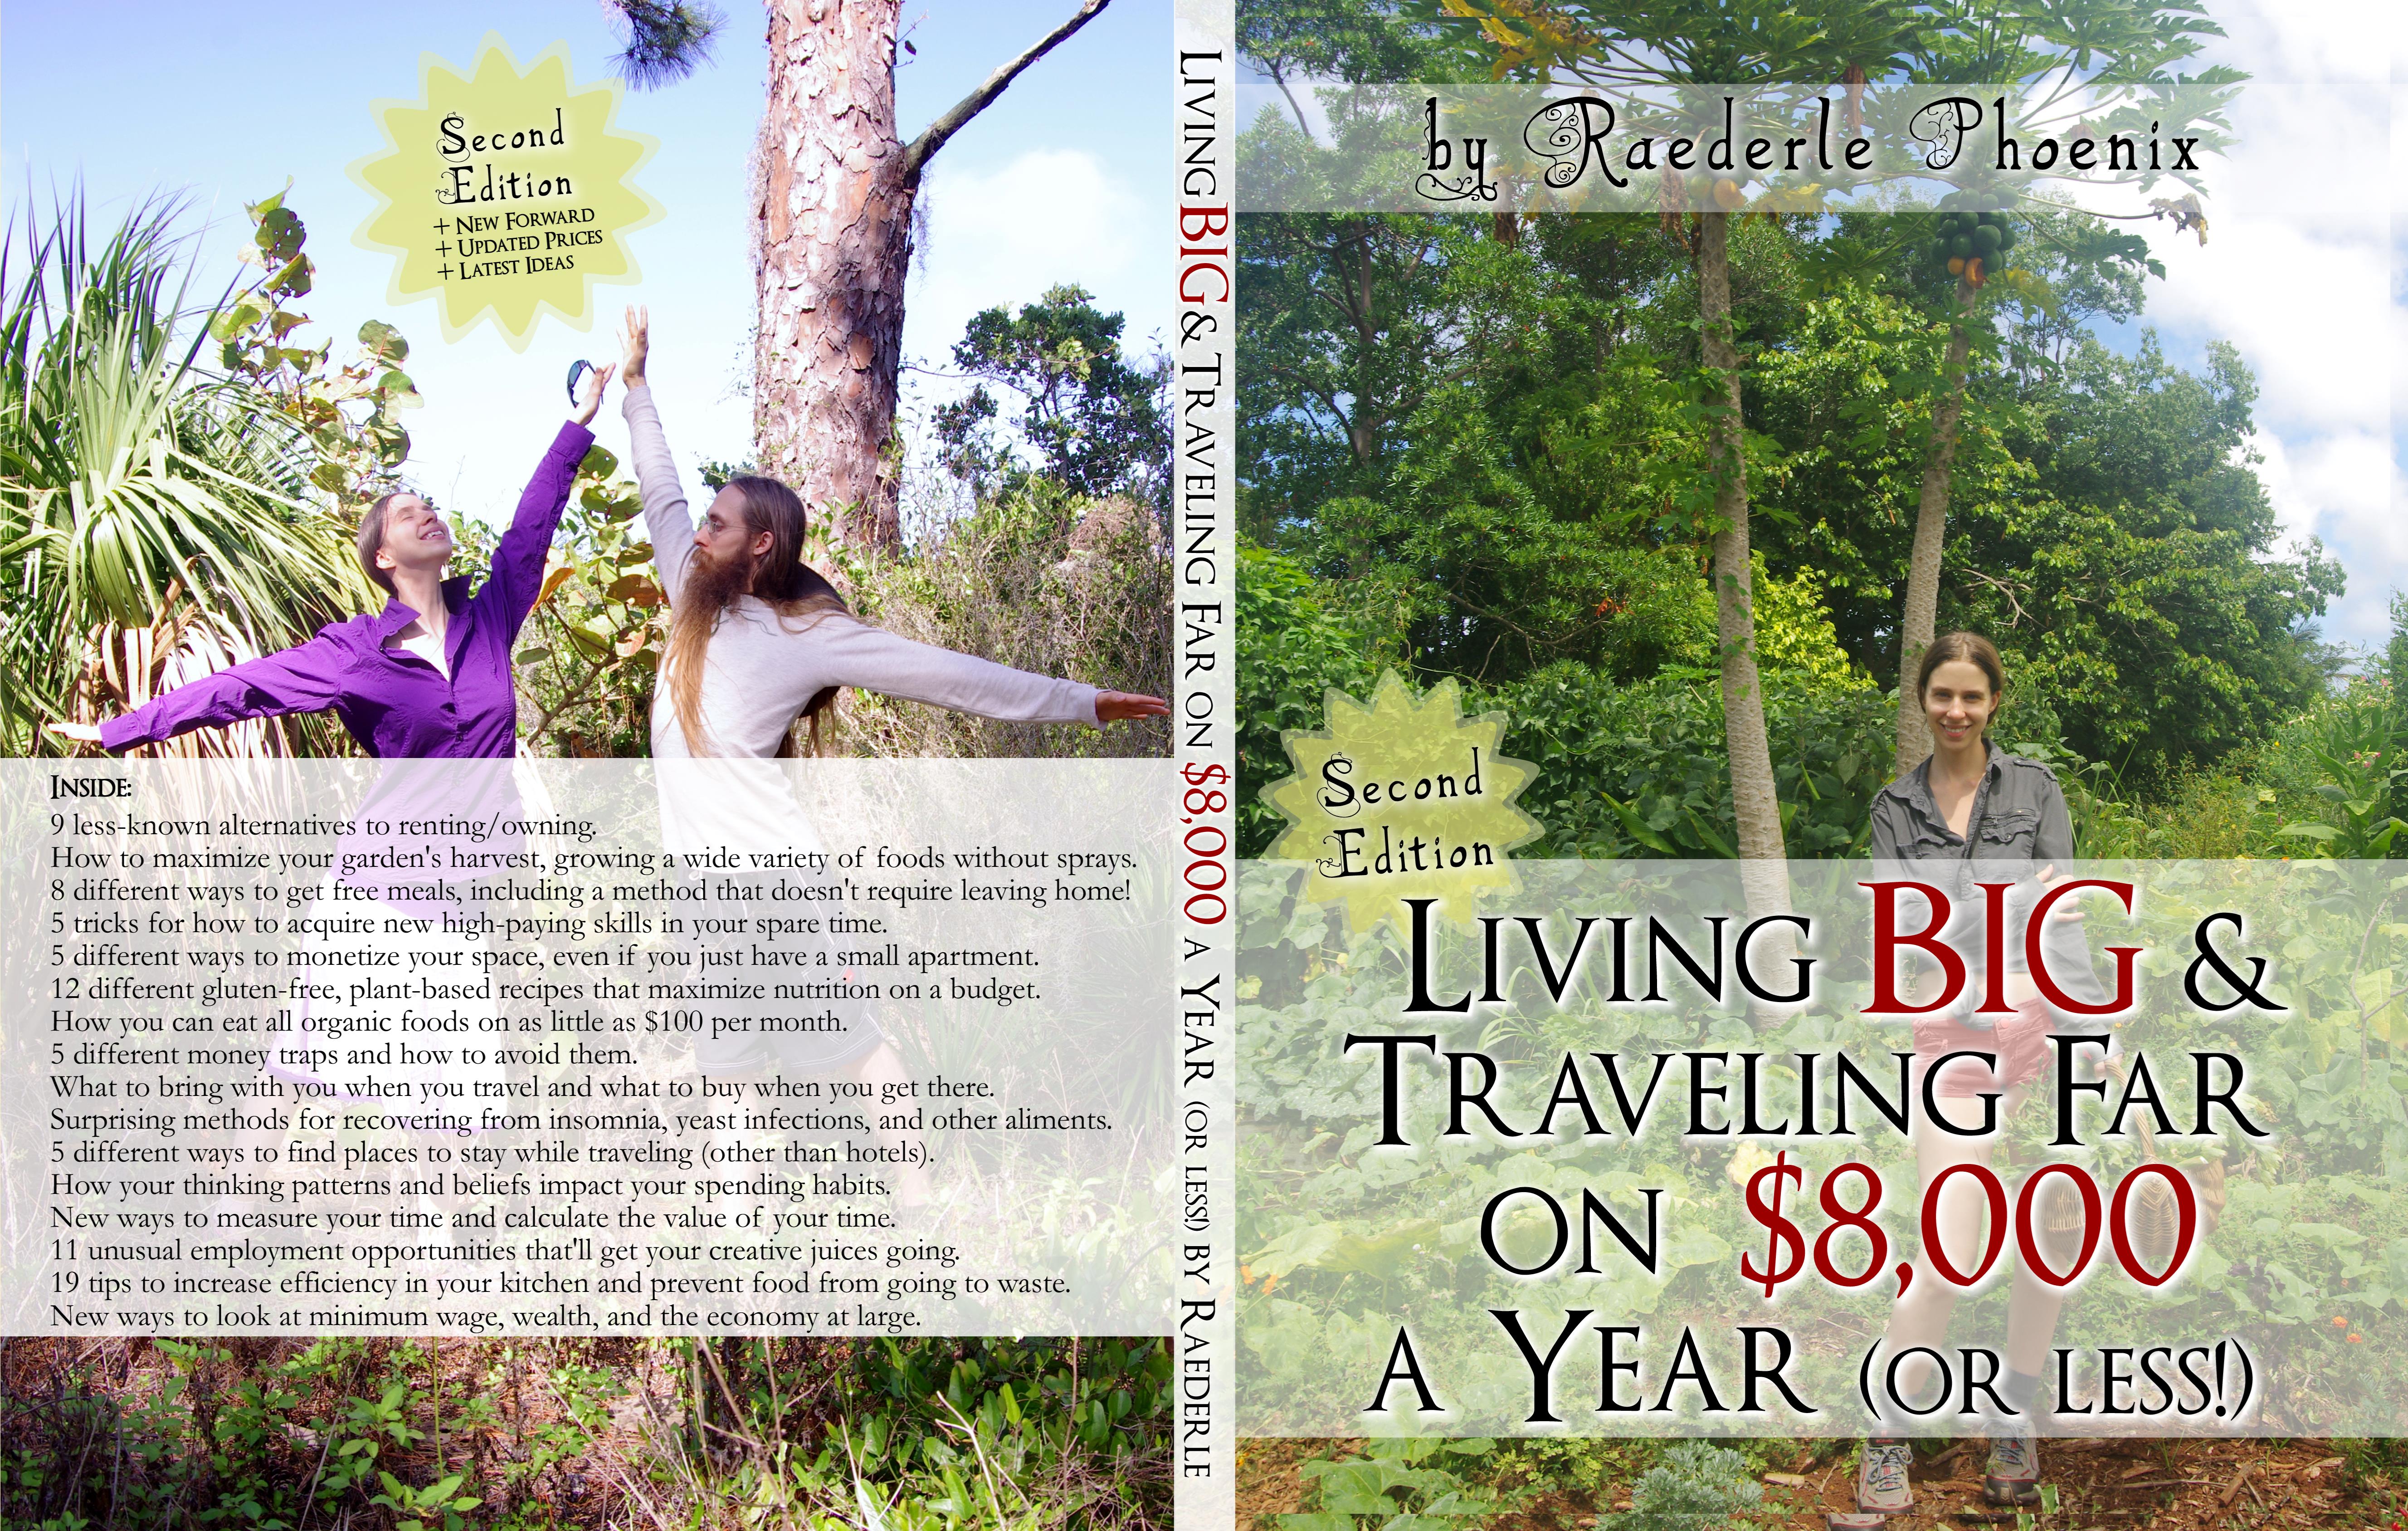 Living Big & Traveling Far on $8,000 a Year (or Less!) cover image